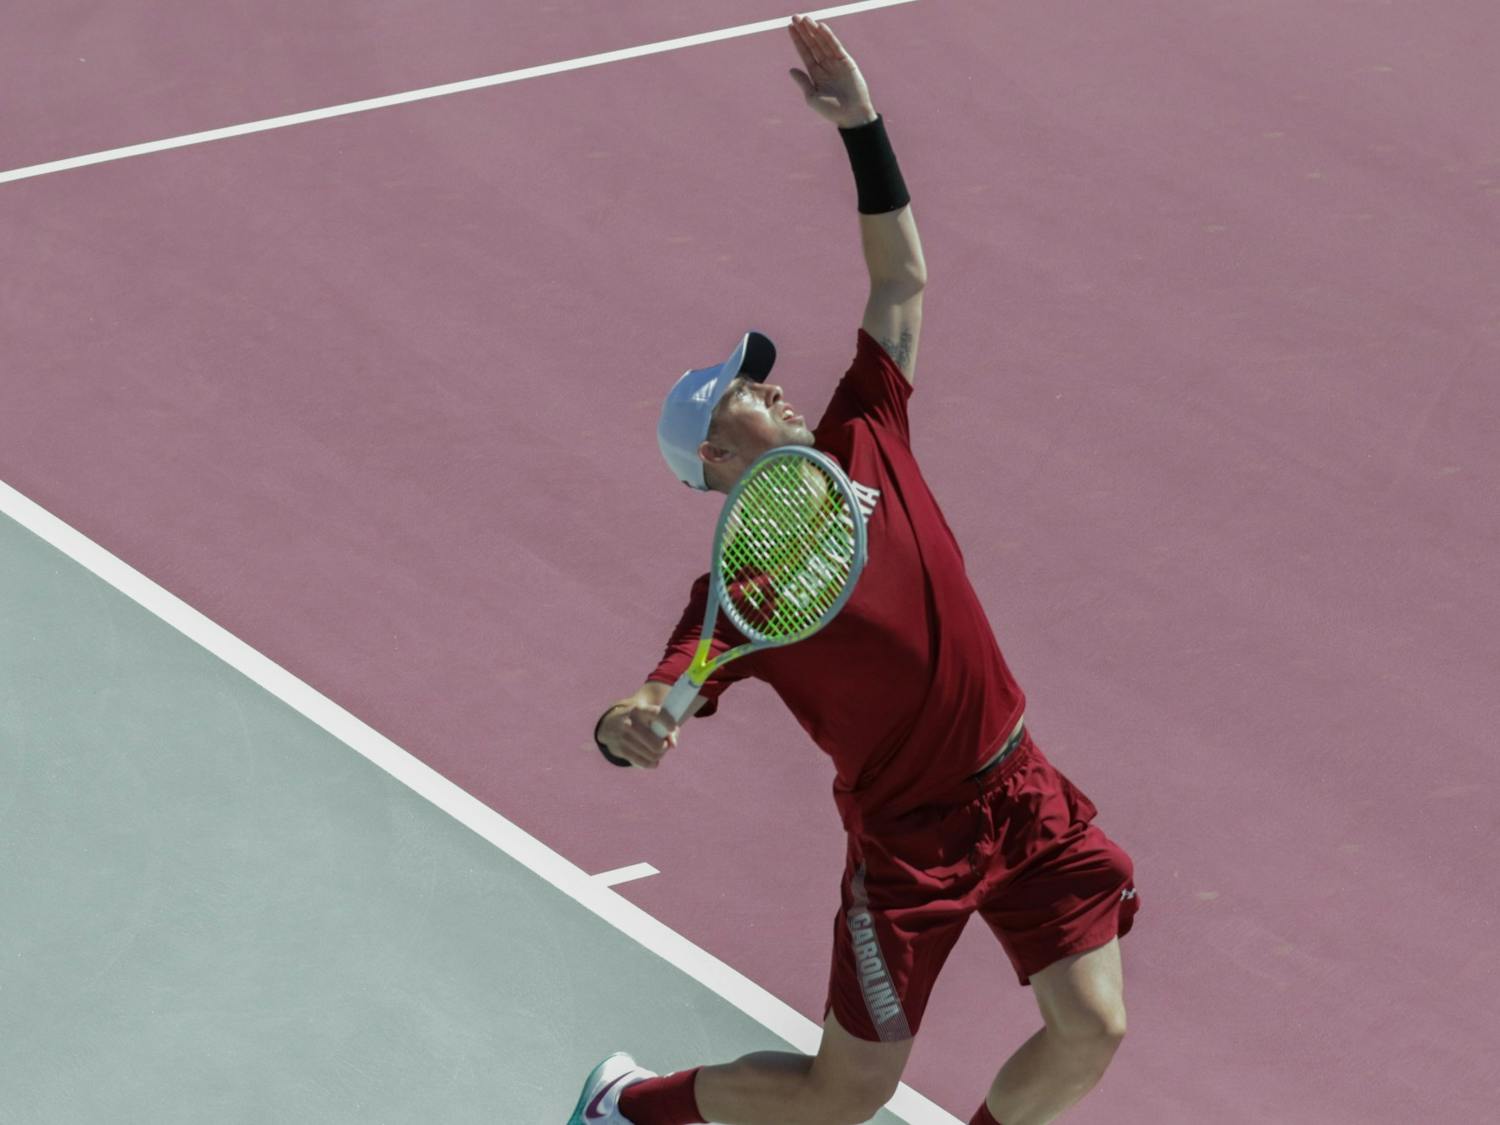 Sophomore Connor Thompson serves the ball at the Carolina Tennis Center on Sunday March 20, 2022. The Gamecocks defeated the Ole Miss Rebels 6-1.